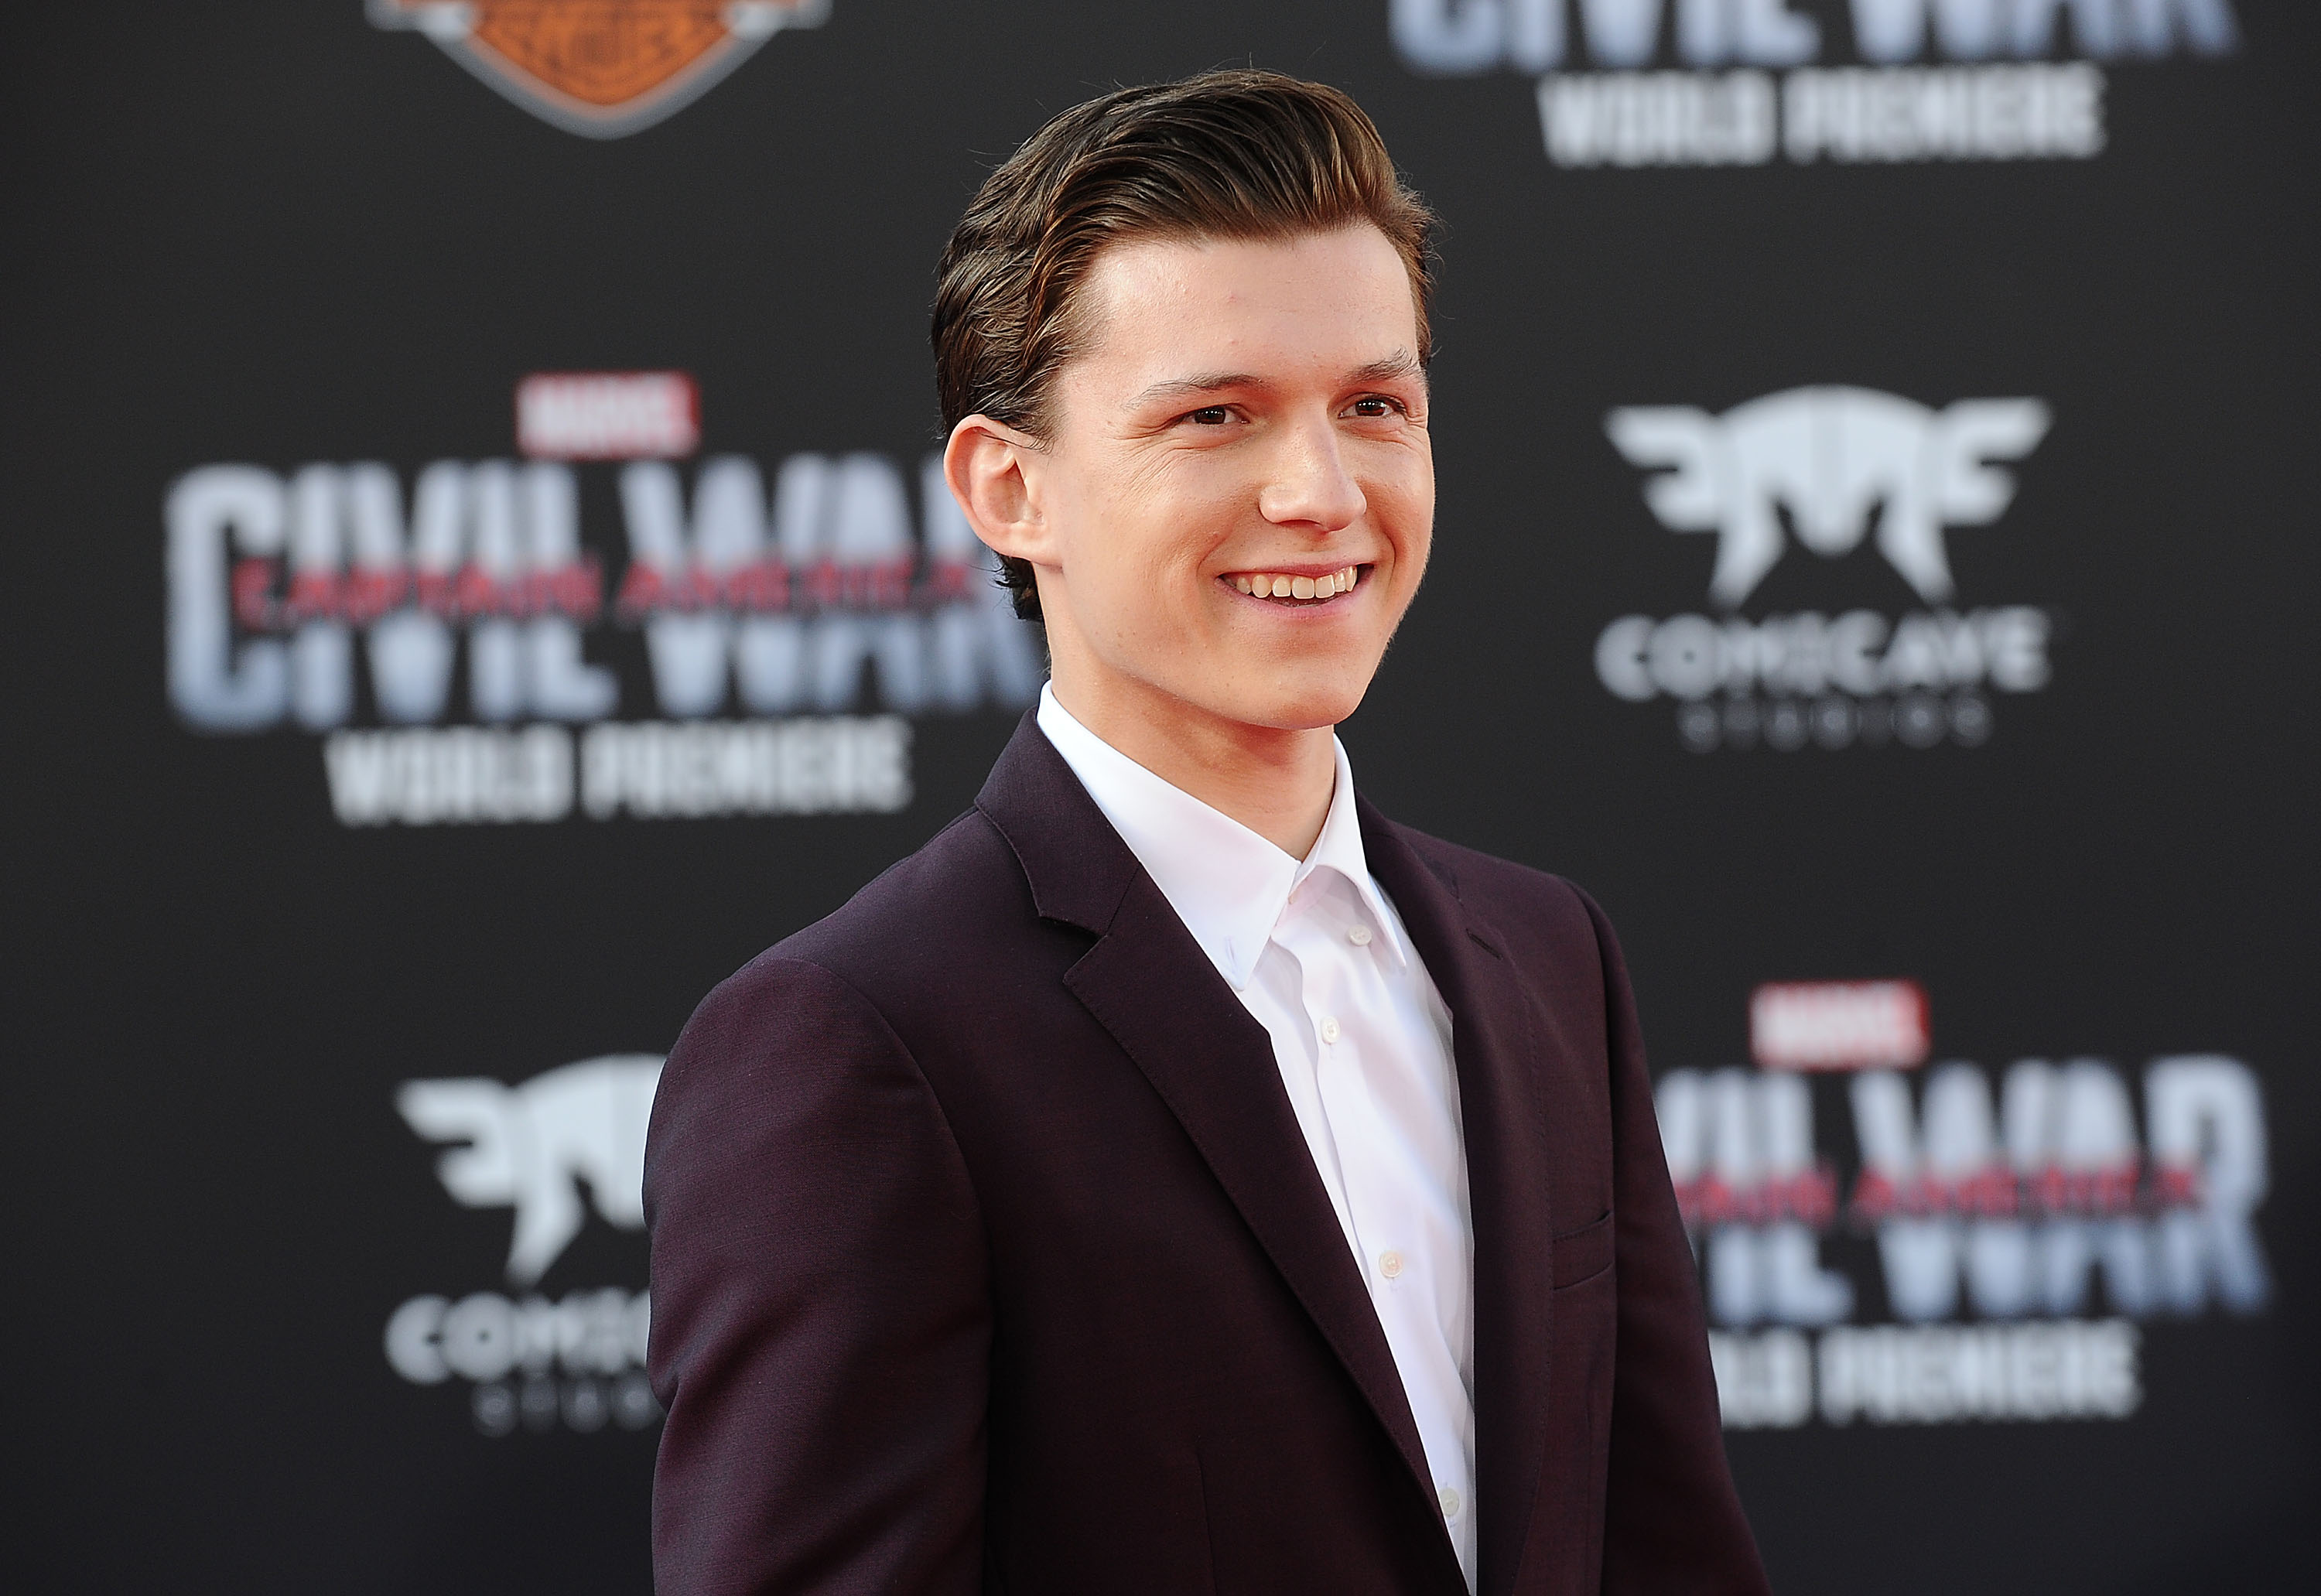 Actor Tom Holland attends the premiere of "Captain America: Civil War" at Dolby Theatre on April 12, 2016 in Hollywood, California. (Jason LaVeris—FilmMagic/Getty)